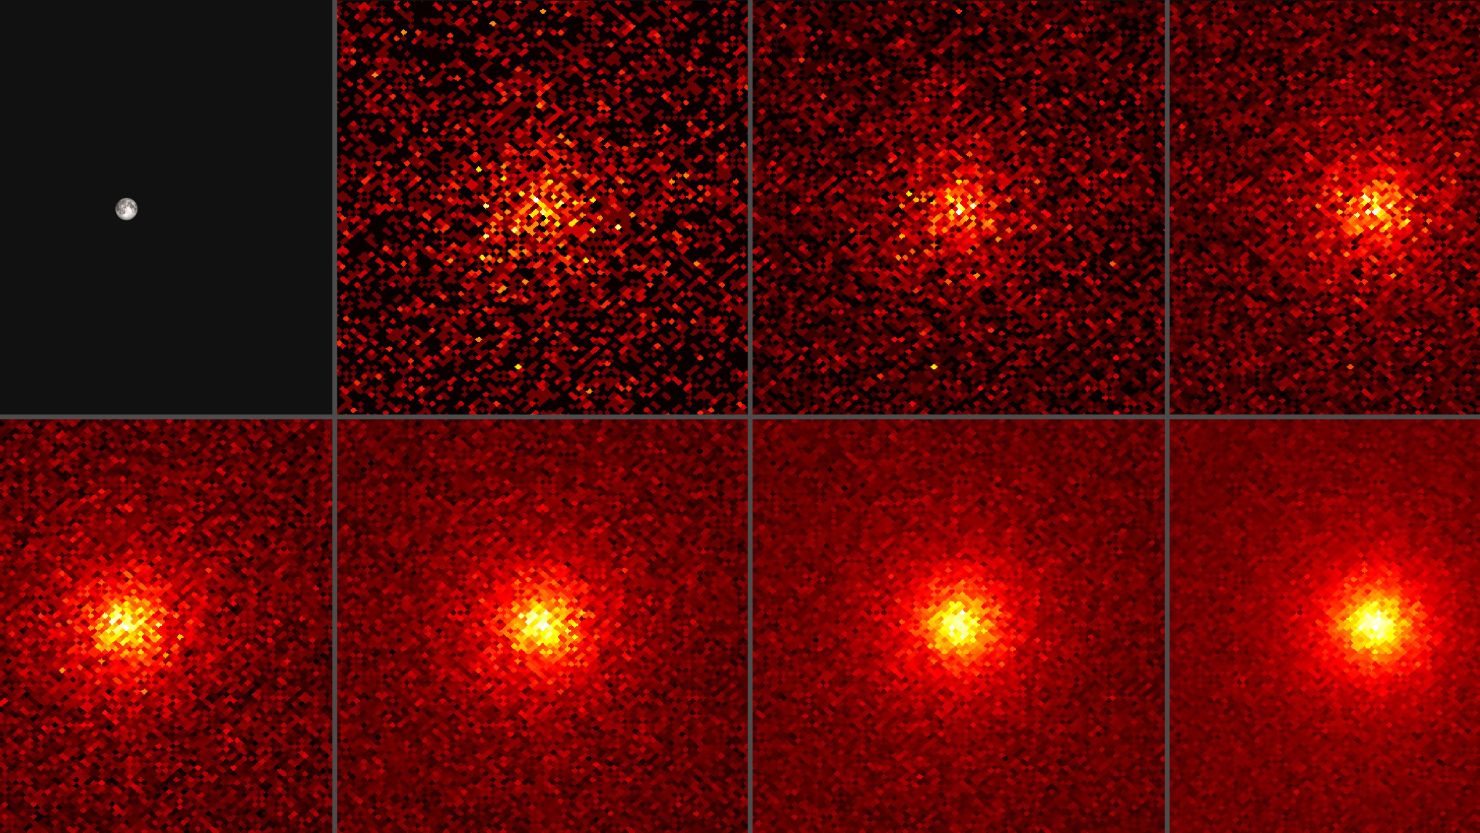 The moon's gamma rays shine brightly as seen in these images from NASA's Fermi telescope. Brighter colors indicate greater numbers of gamma rays. This sequence shows how more months of exposure improved the view.